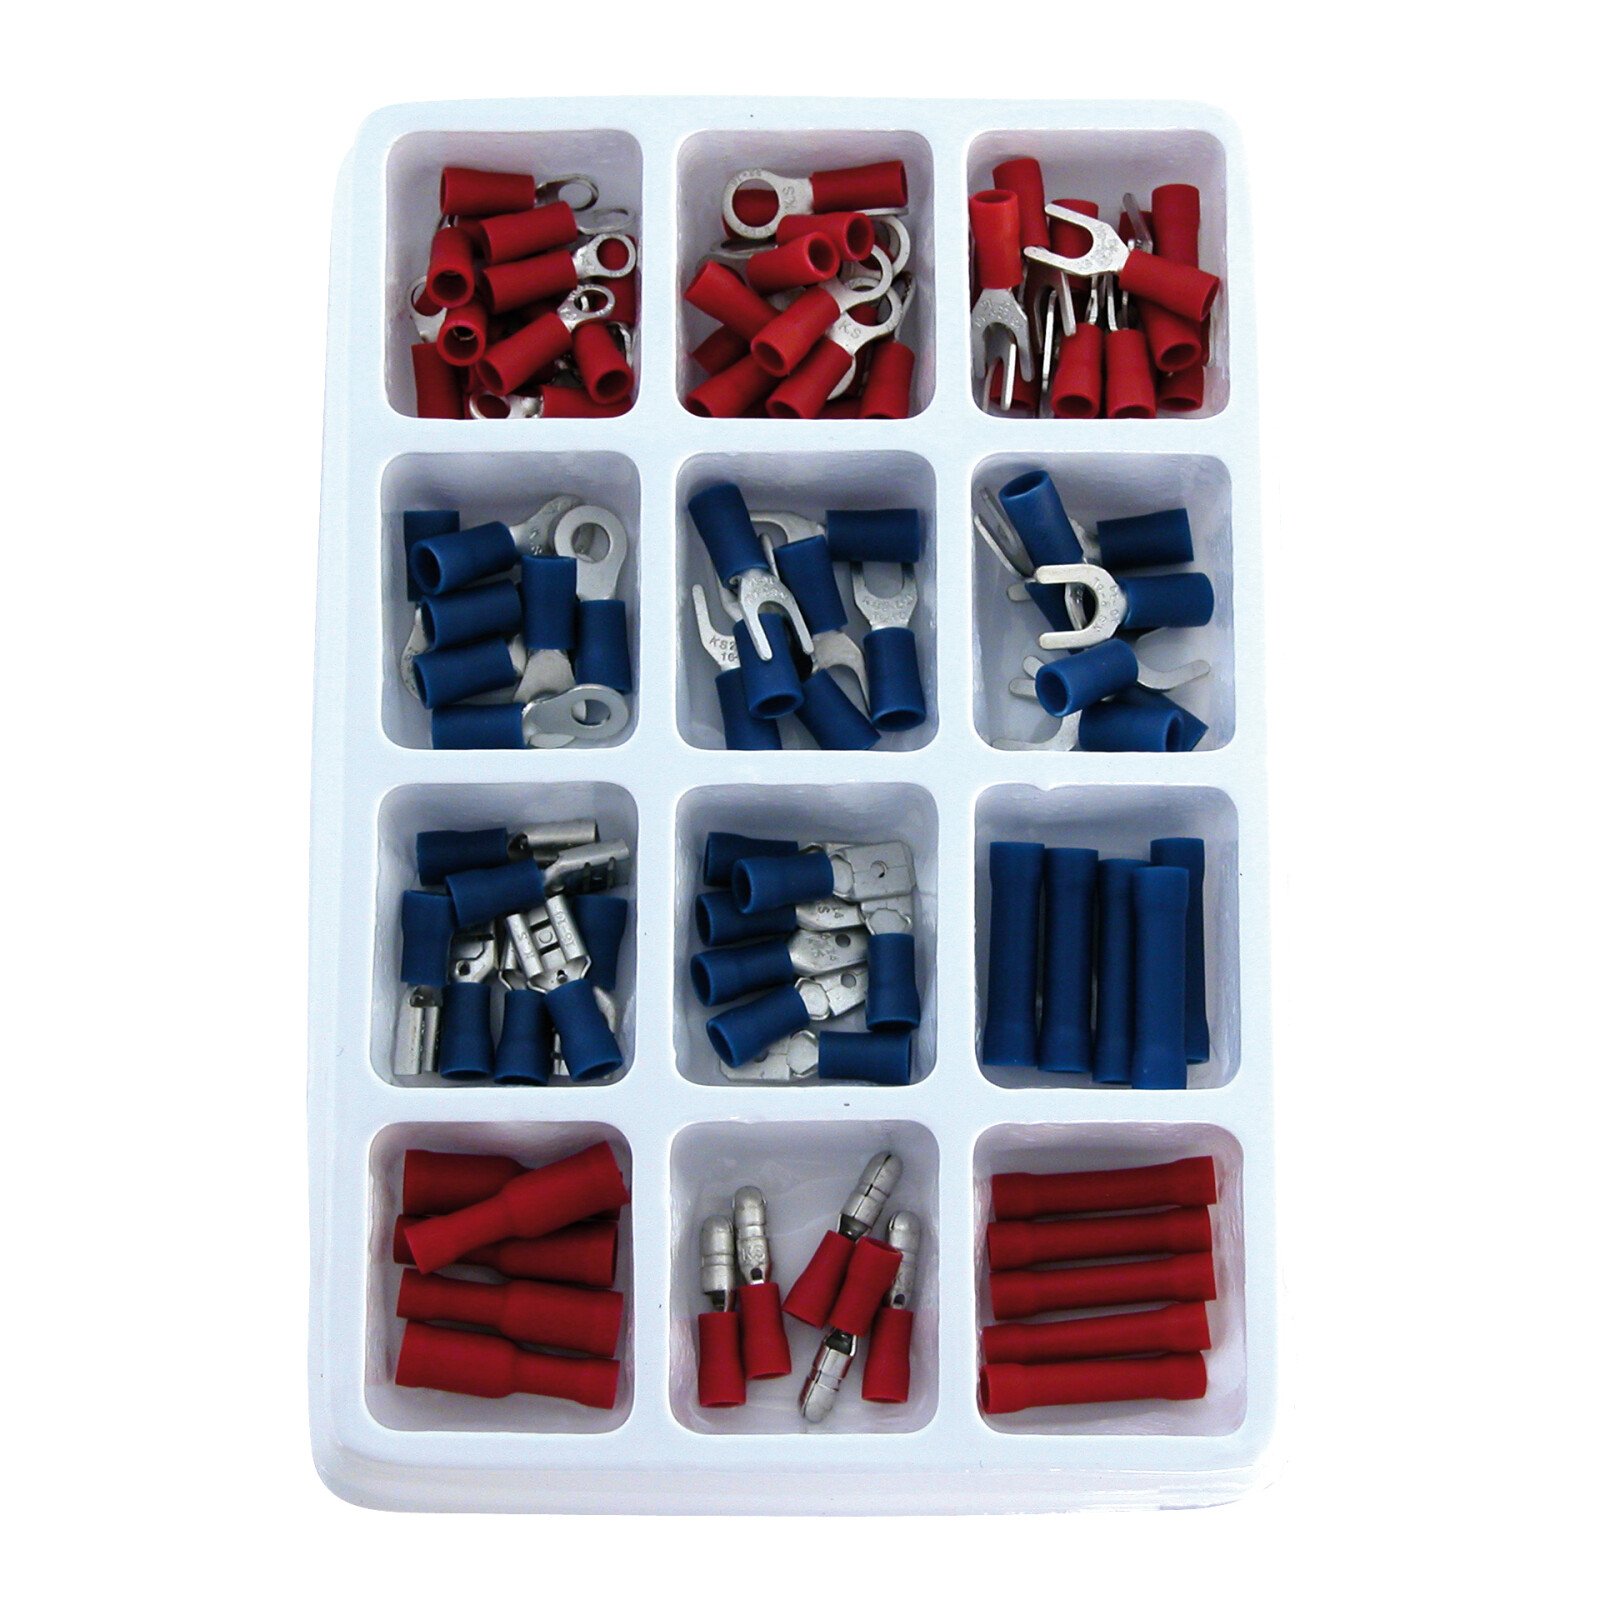 Carpoint cable lugs terminals set 100pcs - Red/Blue thumb